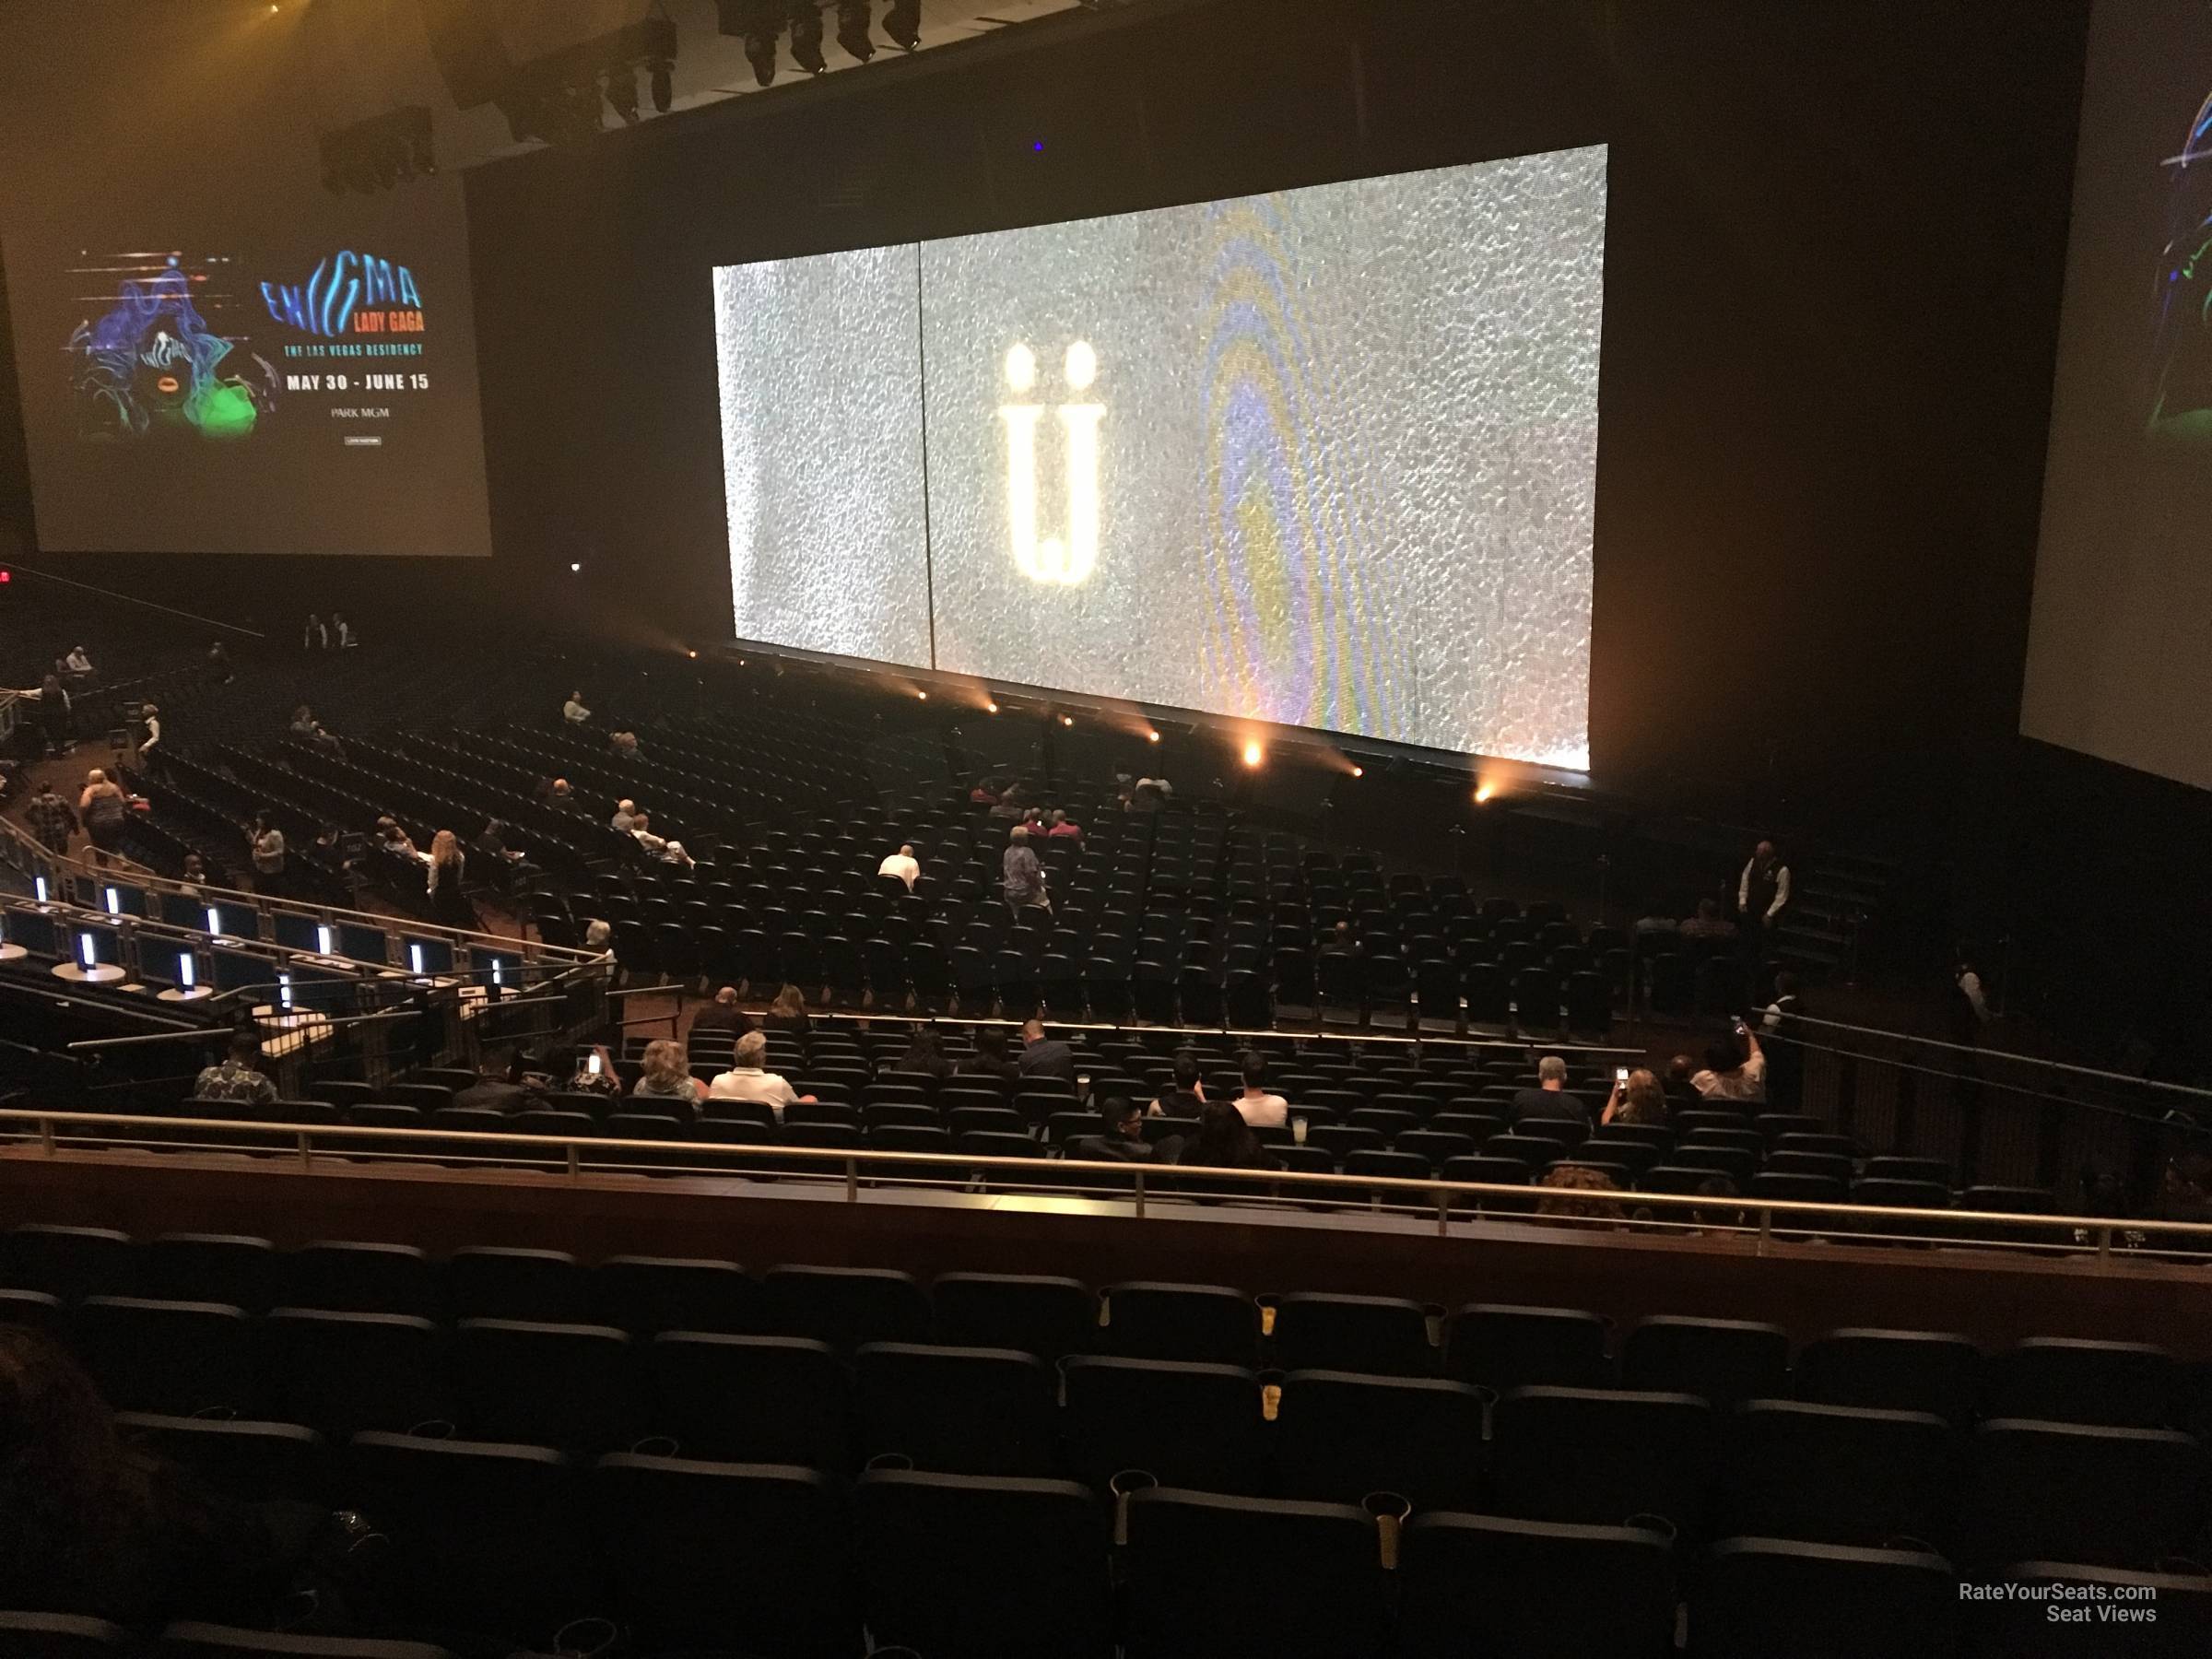 section 302, row g seat view  - dolby live at park mgm